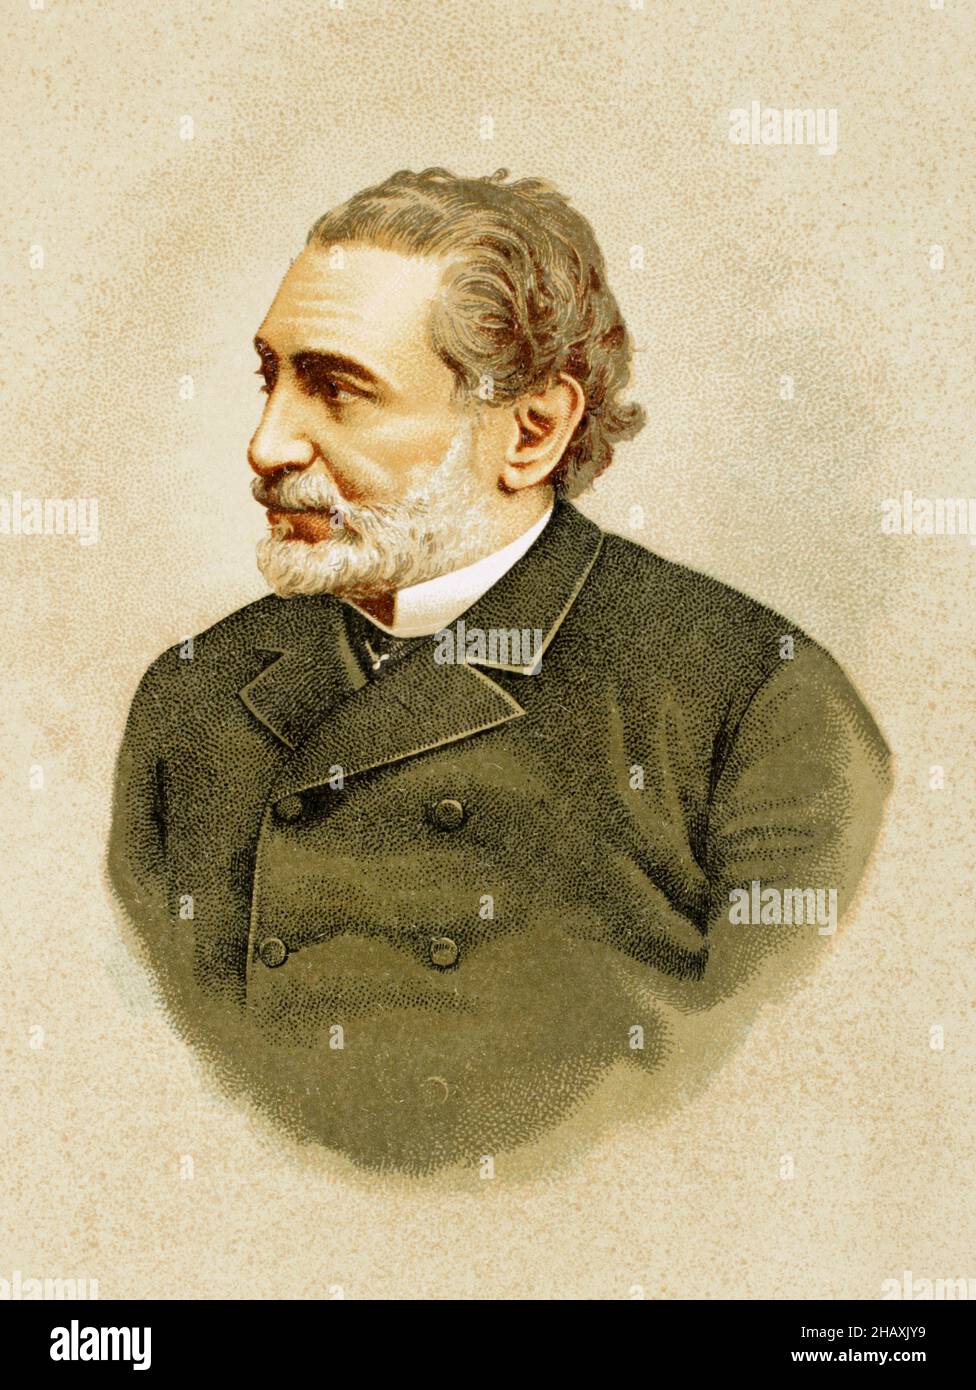 Práxedes Mateo Sagasta (1825-1903). Leader of the Liberal-Progressive Party. President of the Spanish Council of Ministers on several occasions between 1870 and 1902. Portrait. Chromolithography. "Historia General de España" (General History of Spain), by Miguel Morayta. Volume VIII. Madrid, 1894. Stock Photo